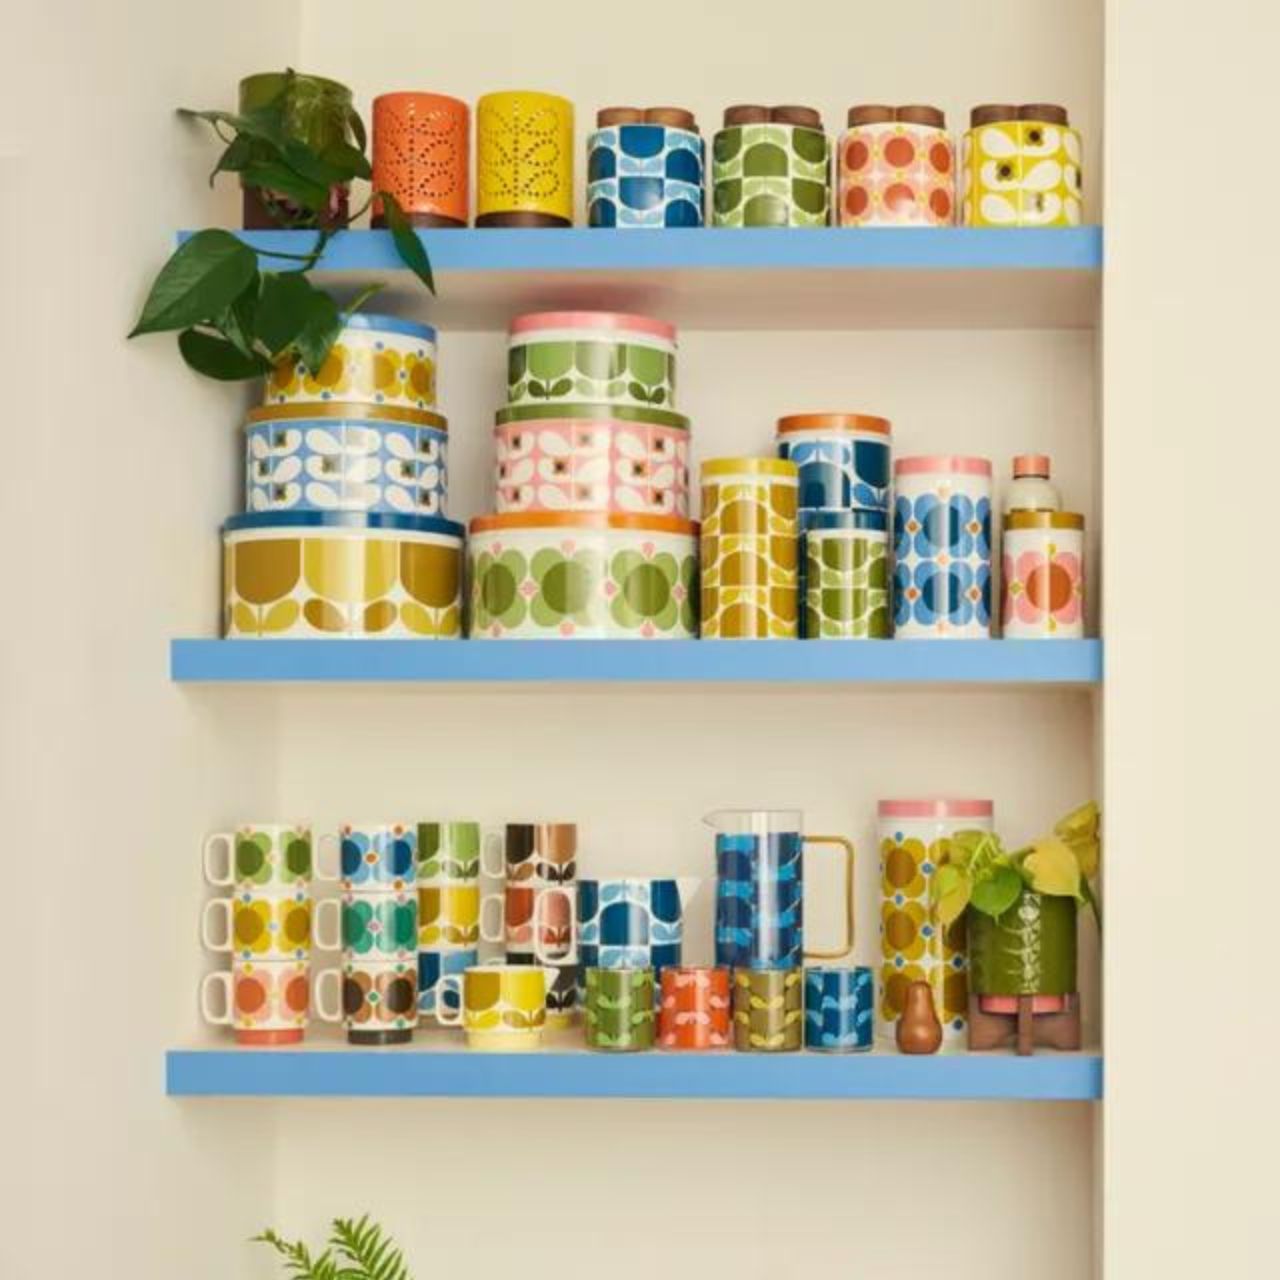 Orla Kiely Nesting Canister Tins - Set of 3 Block Flower  From one the world's top fashion designers Orla Kiely, comes these set of three metal storage canisters in her Block Flower design. A great addition to any kitchen counter top with their bright and so recognisable colour pallet.